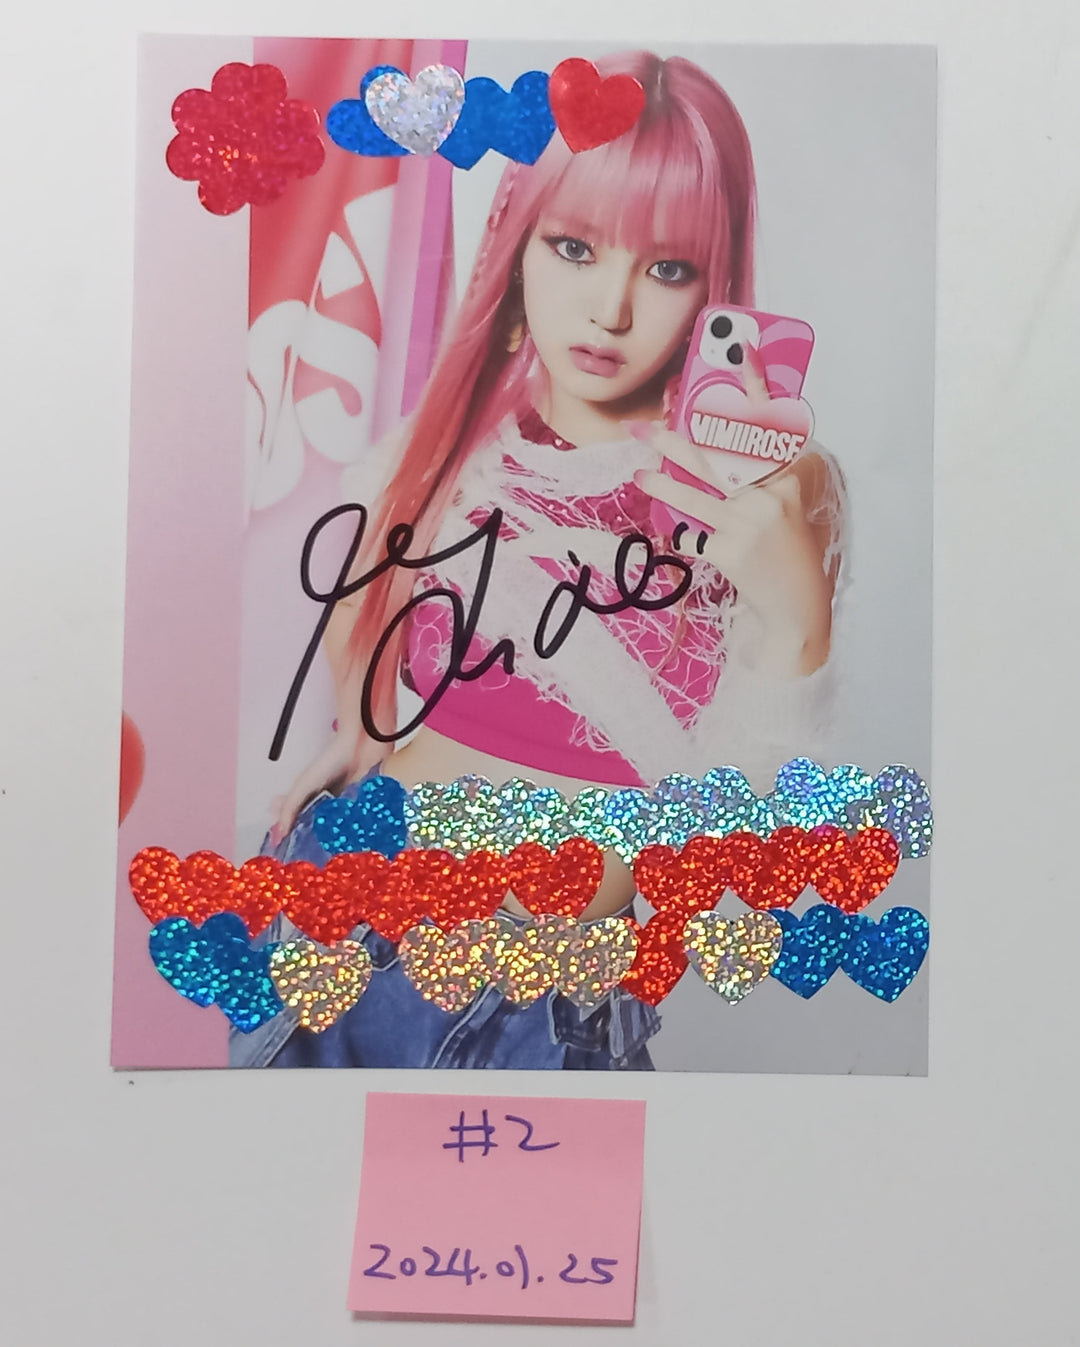 Mimiirose "LIVE" - A Cut Page From Fansign Event Album [24.1.25]